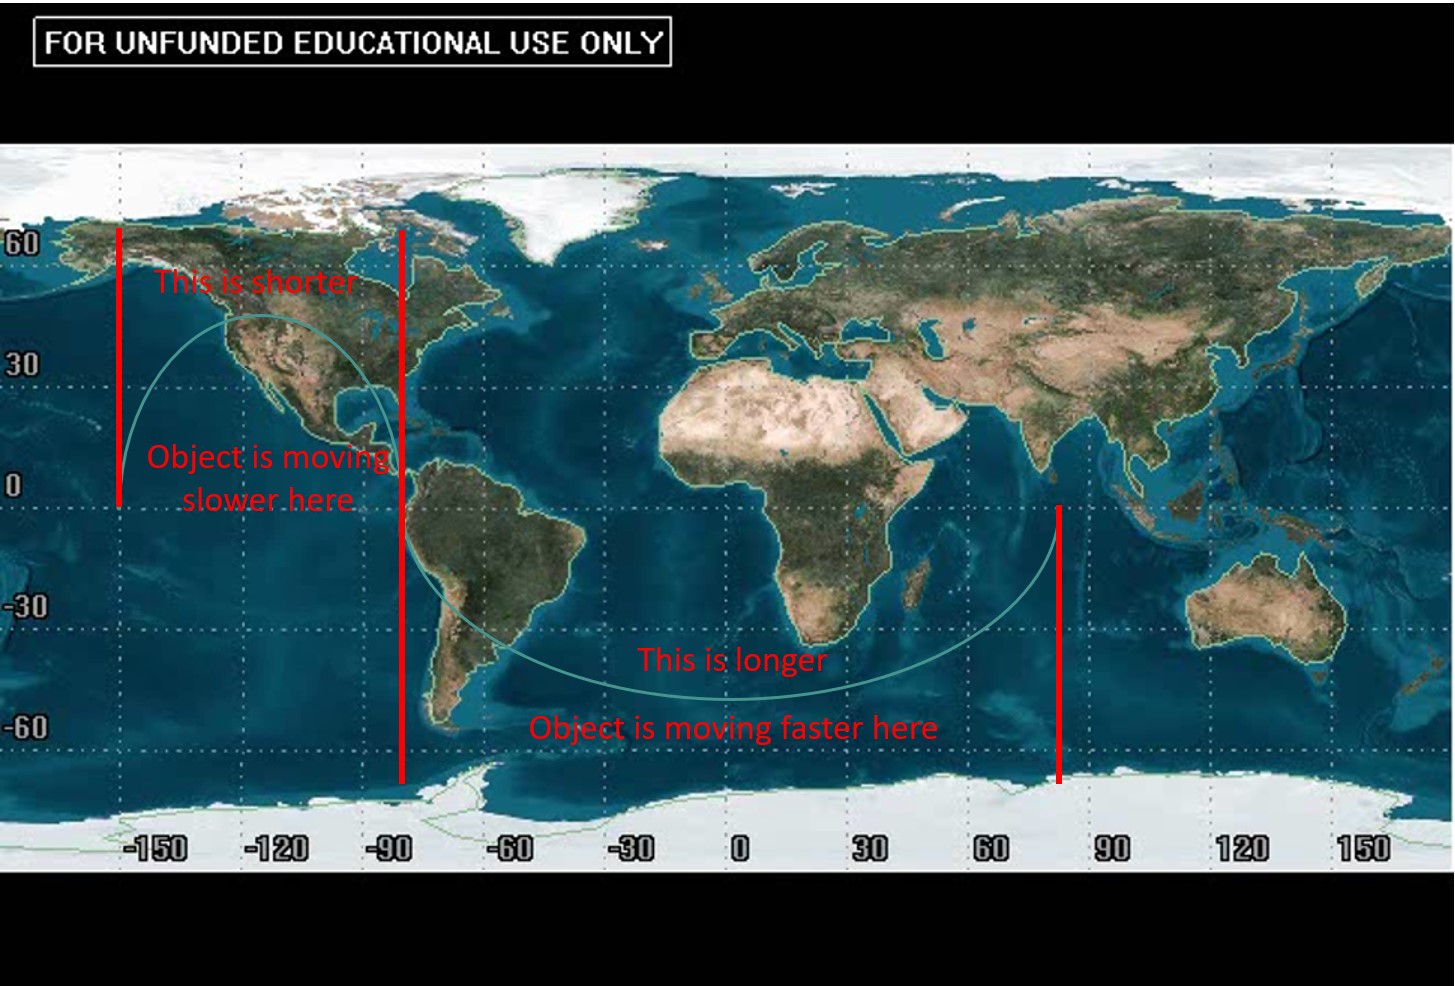 The image illustrates how, due to the Earth's rotation, the portions of the ground track where the satellite is moving relatively slow appear "shorter" than the portions where the satellite is moving relatively fast. This is used to determine the location of perigee.